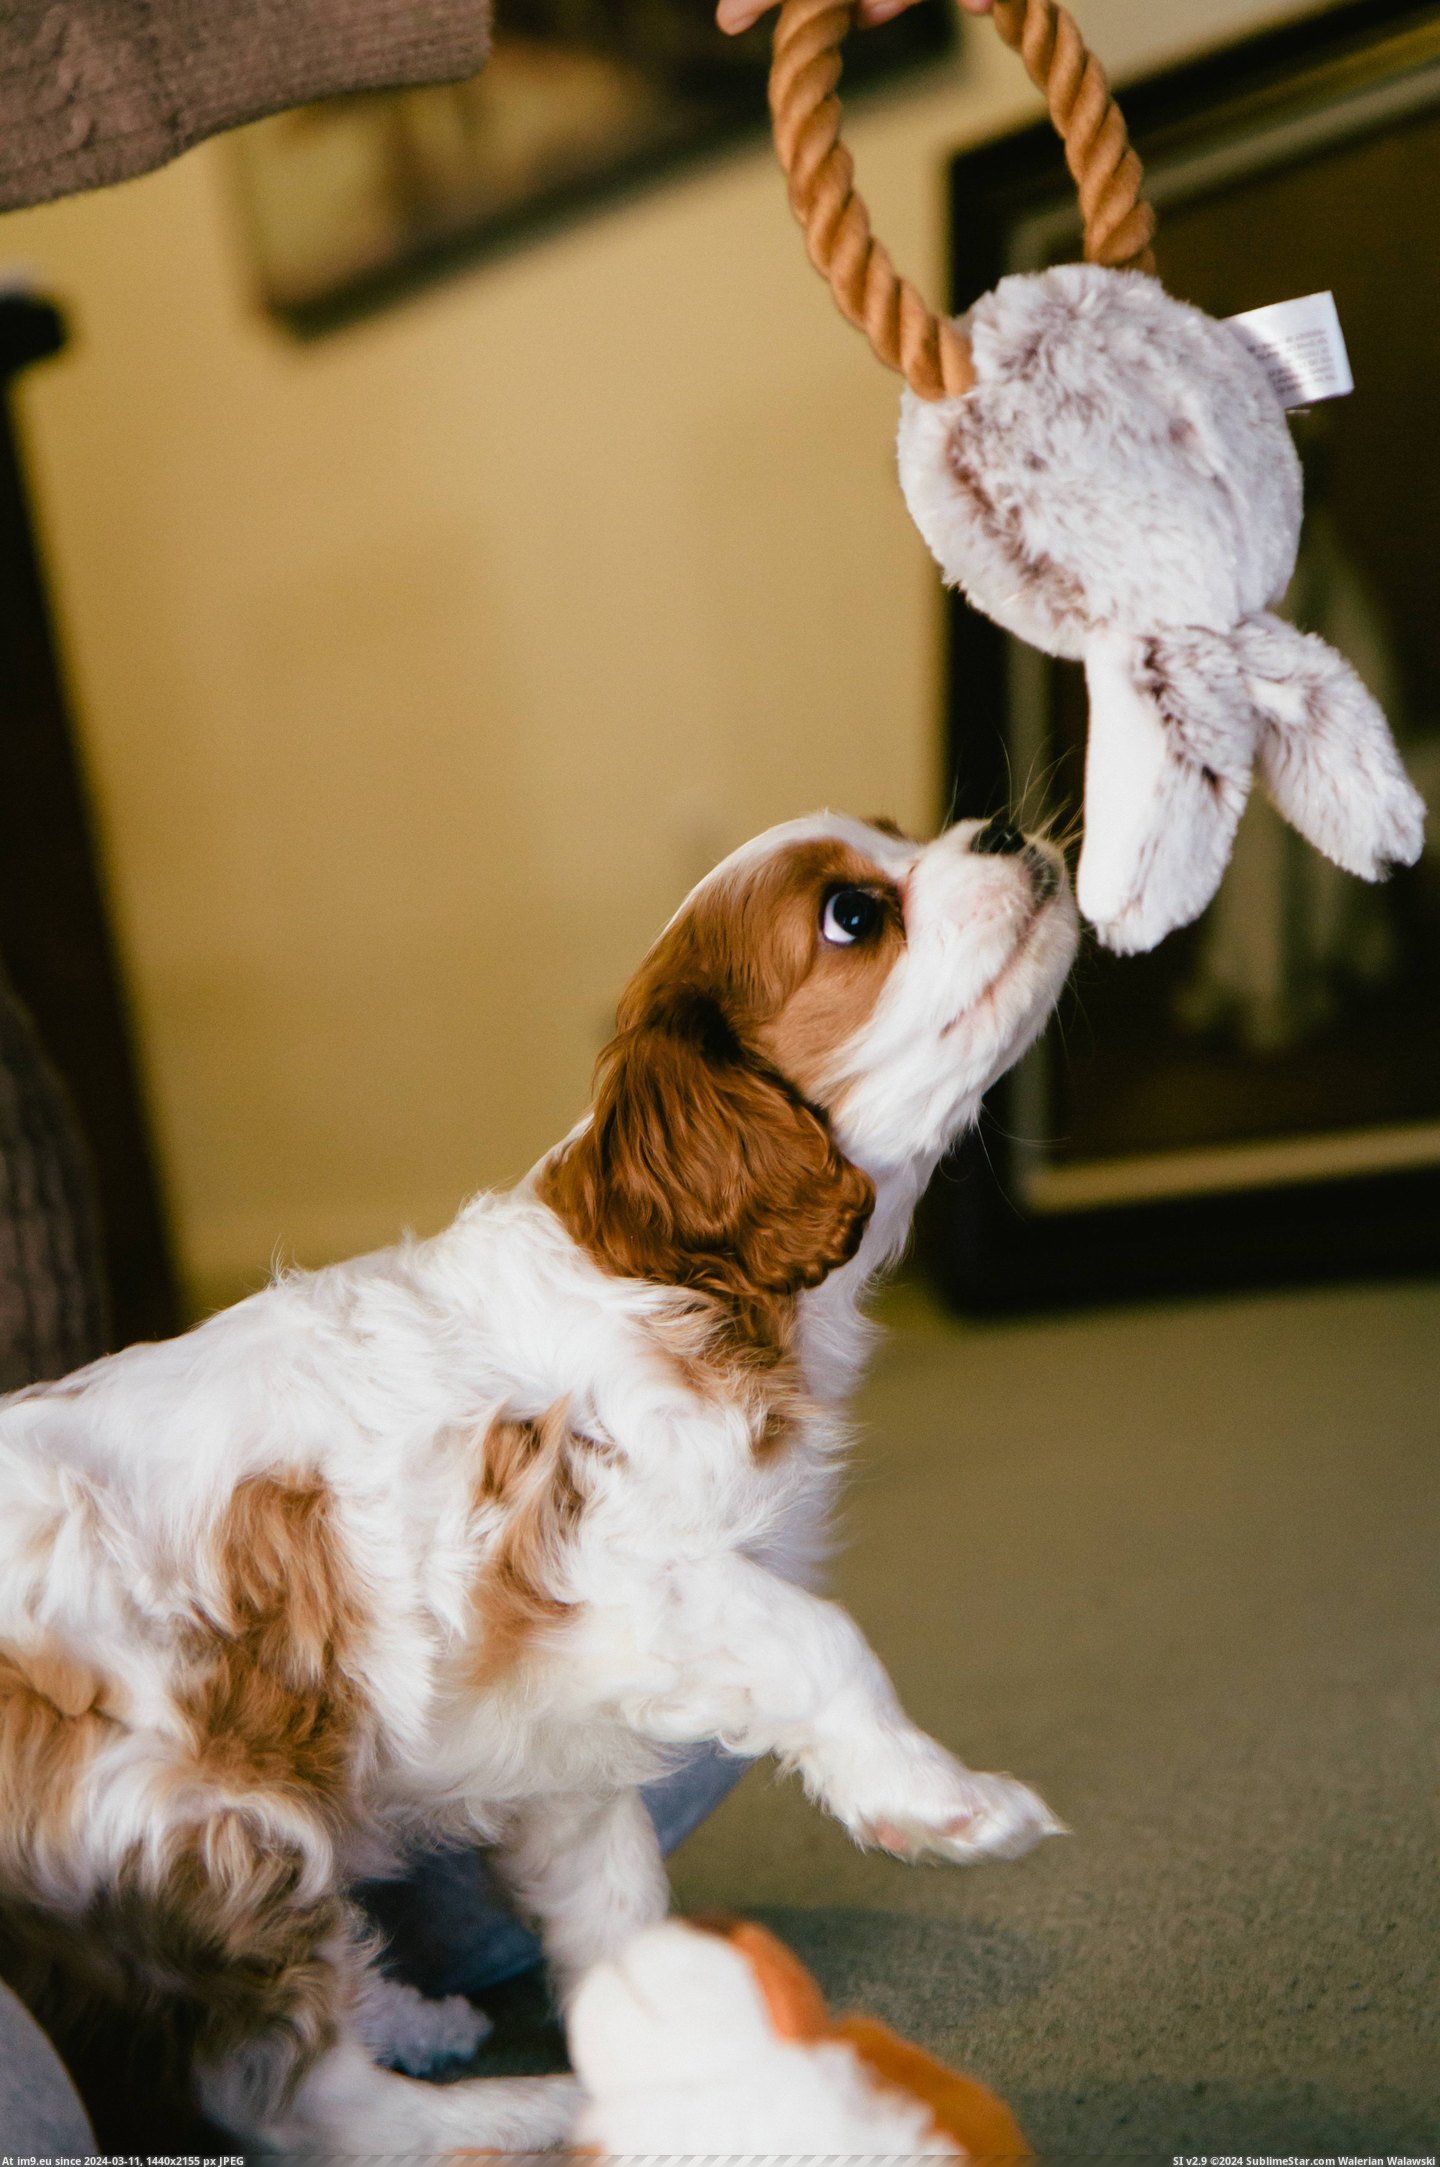 #Old #New #She #Our #Nami #Cavalier #Spaniel #Week #King #Say #Charles [Aww] Please say hello to Nami! She's our new 8-week old Cavalier King Charles Spaniel. 1 Pic. (Image of album My r/AWW favs))